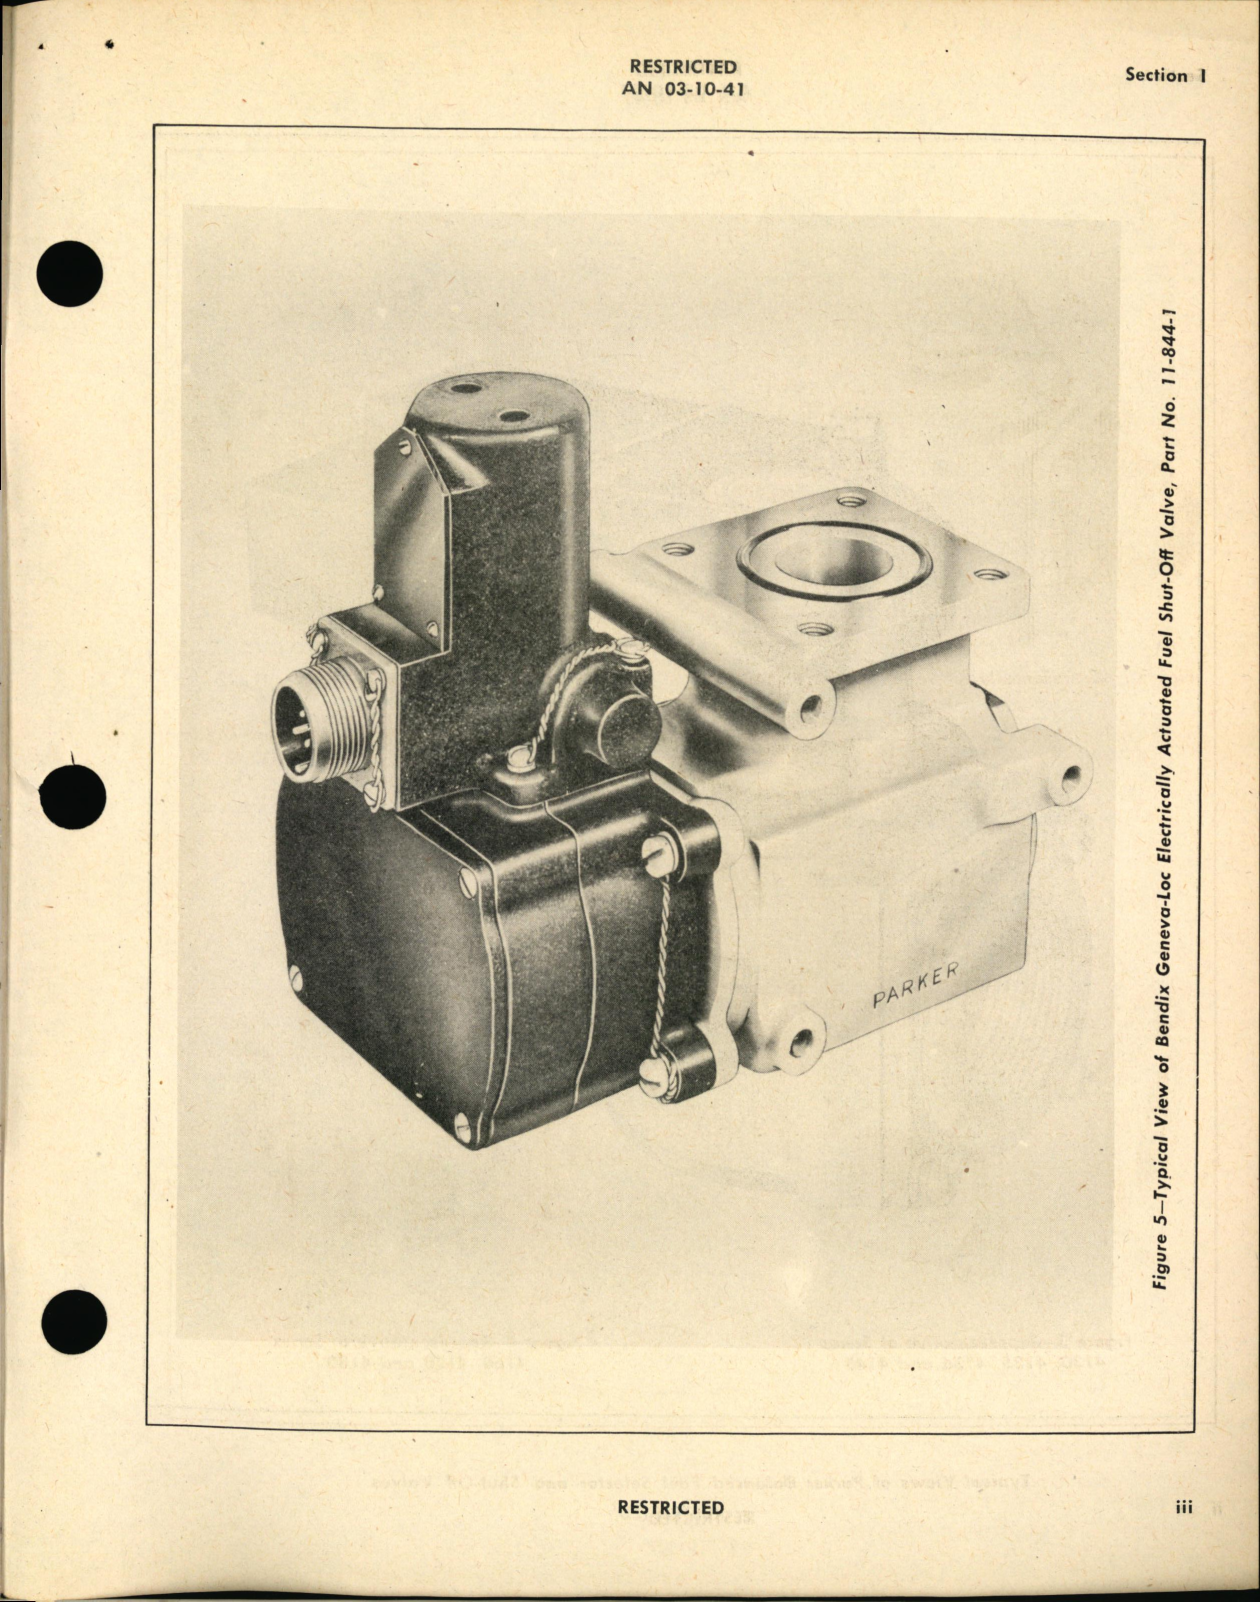 Sample page 5 from AirCorps Library document: Operation, Service, & Overhaul Instructions with Parts Catalog for Balanced Fuel Selector Valves